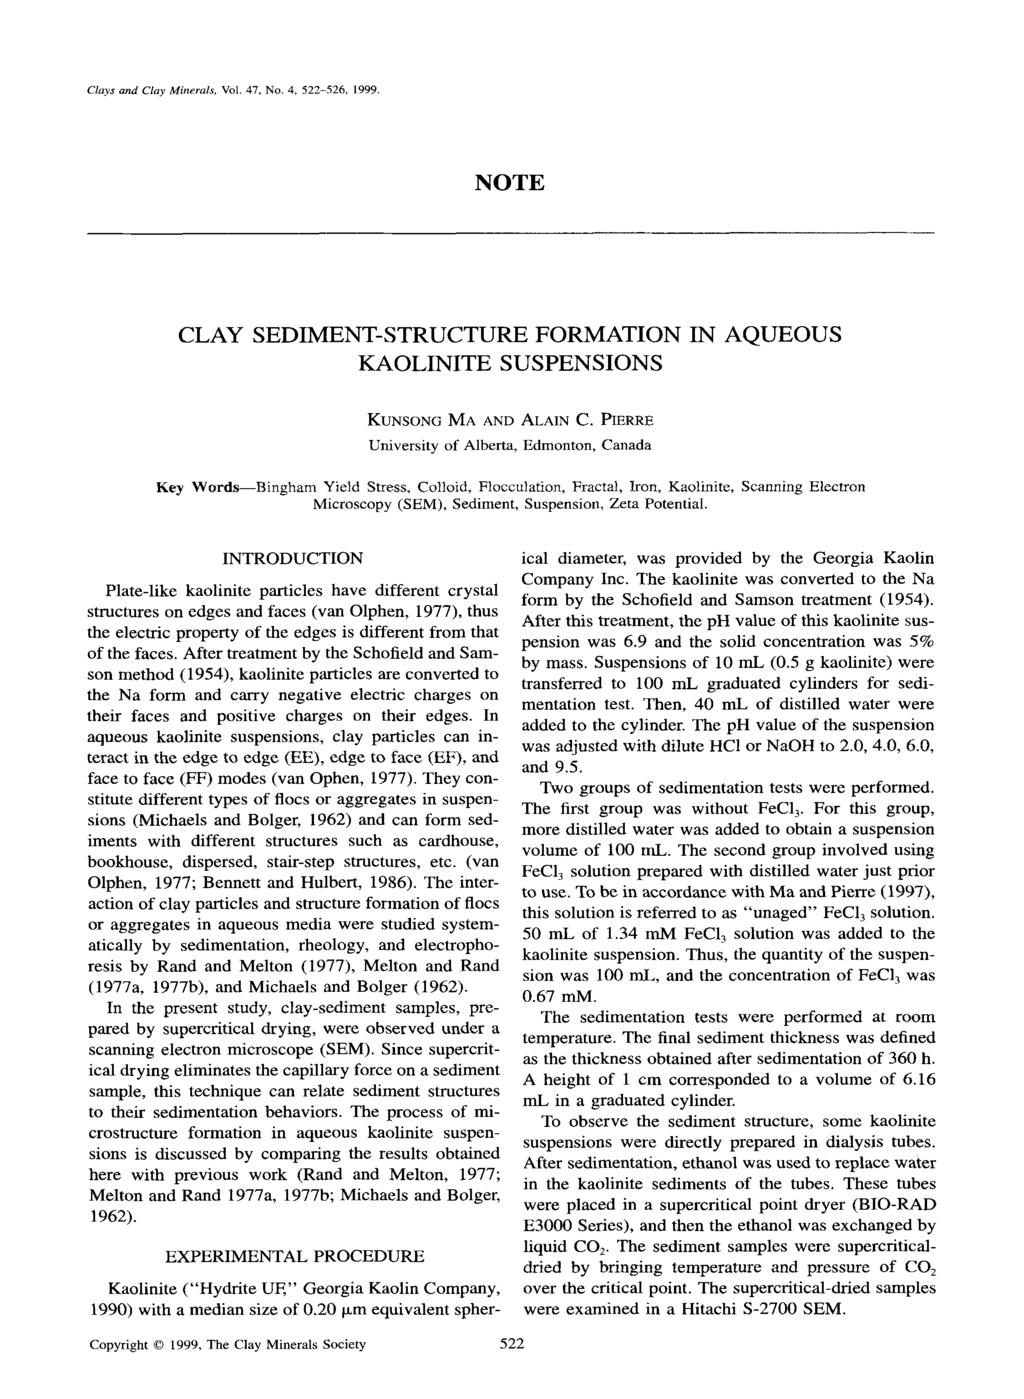 Clays and Clay Minerals, gol. 47, No. 4, 522-526, 1999. NOTE CLAY SEDIMENT-STRUCTURE FORMATION IN AQUEOUS KAOLINITE SUSPENSIONS KUNSONG MA AND ALAIN C.